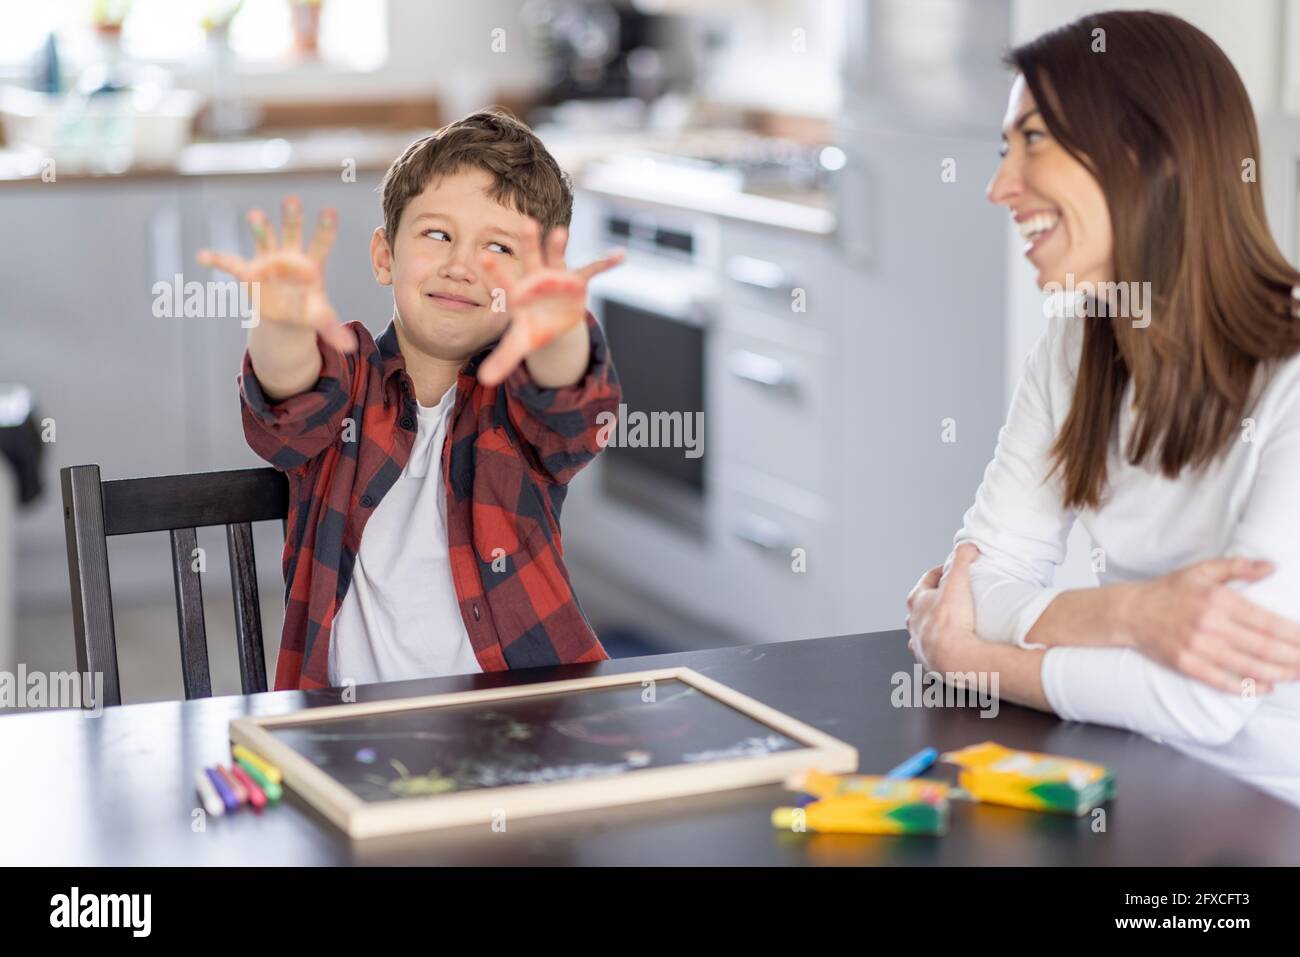 Boy showing dirty hands while looking with sideways glance at mother in kitchen Stock Photo